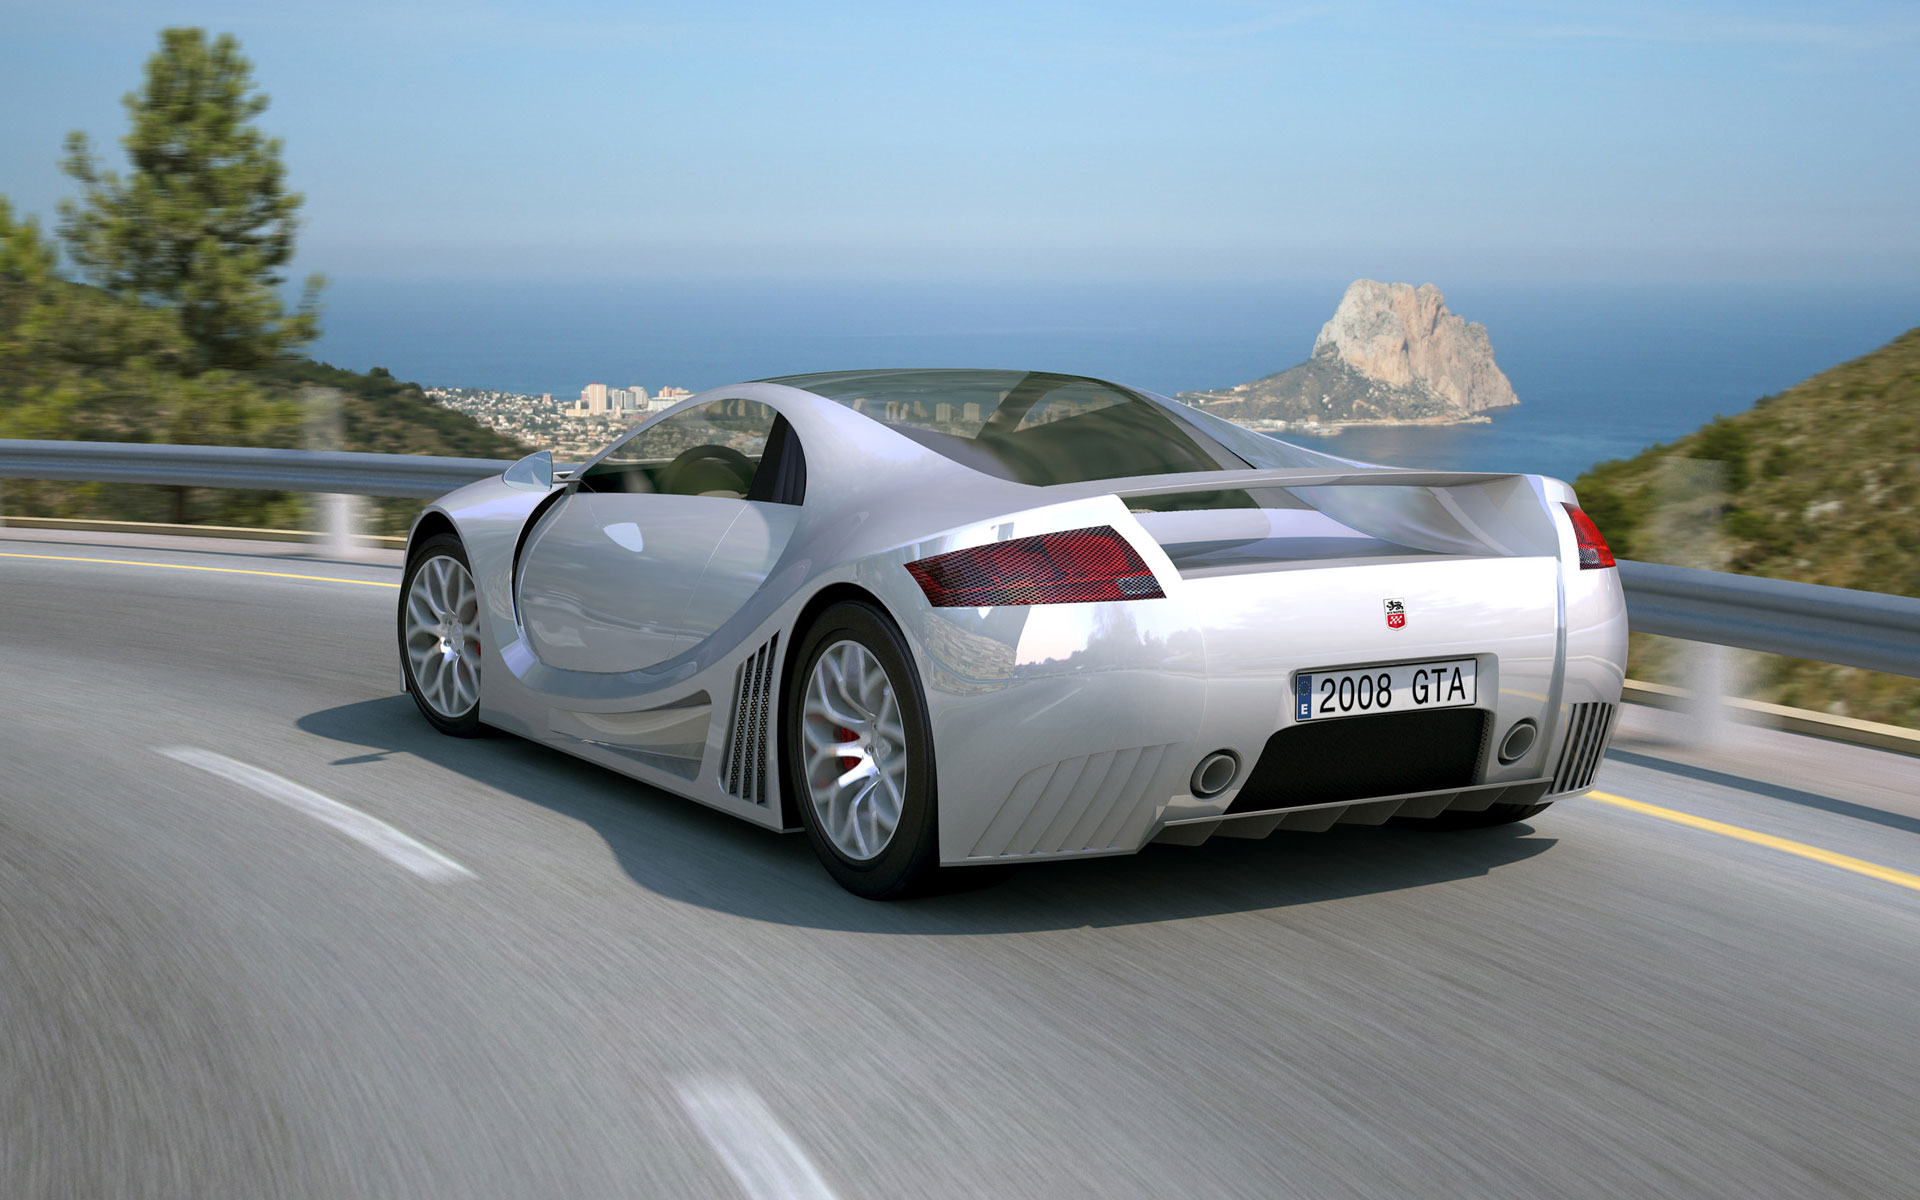 HD Sport Car Wallpaper Pics Pictures For